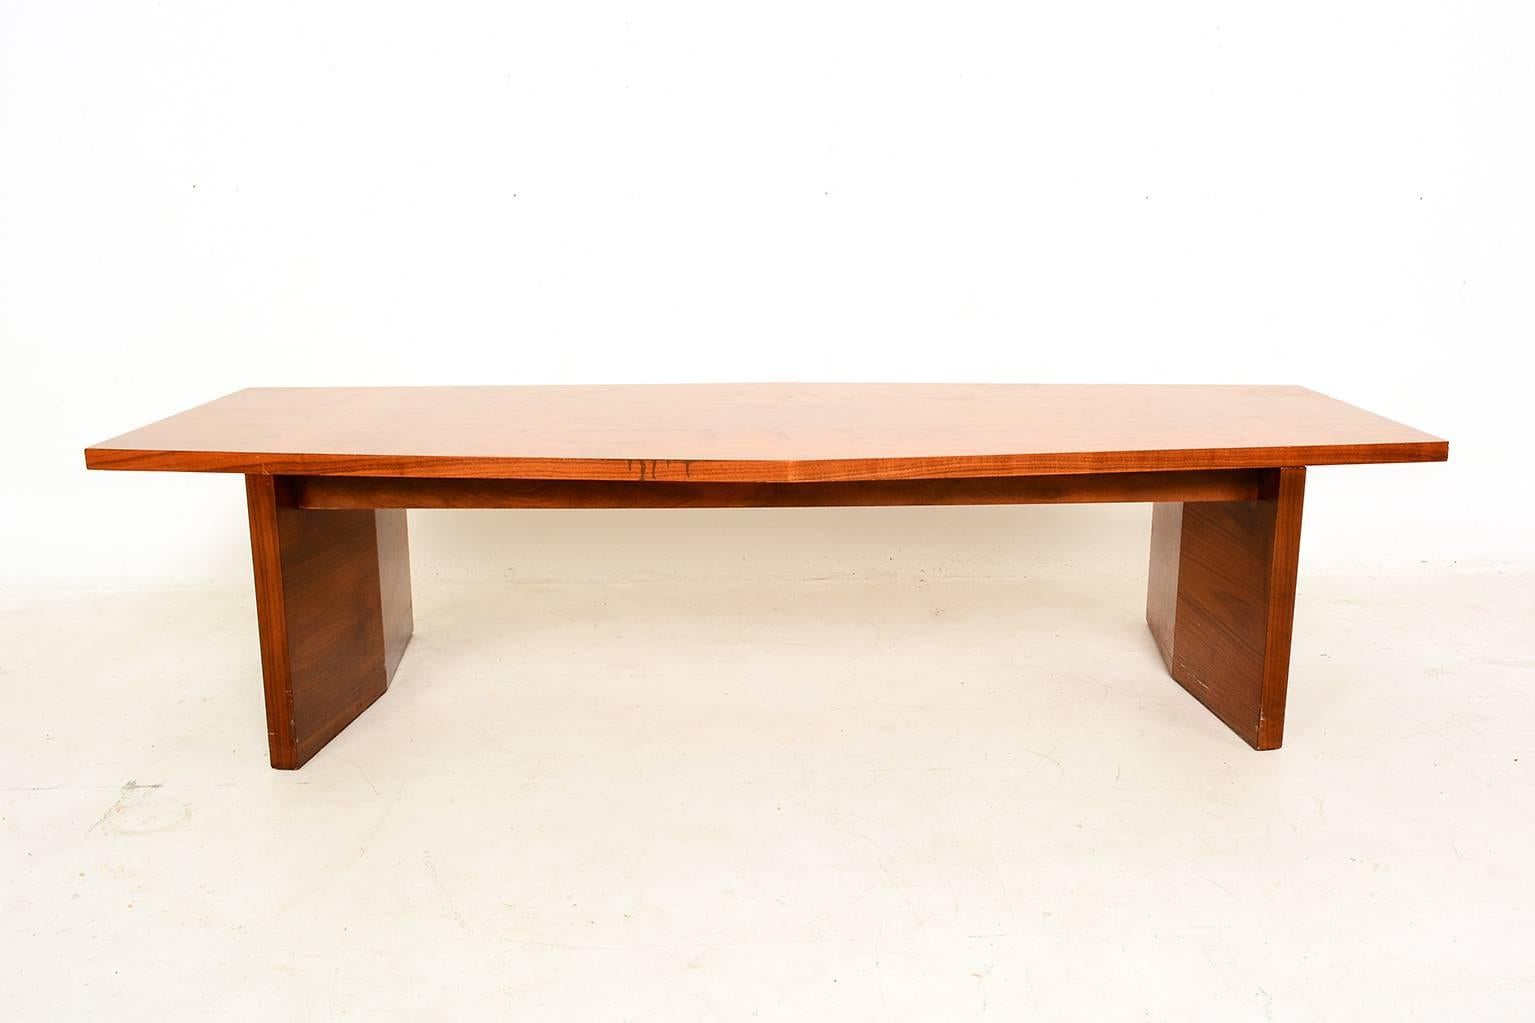 For your consideration:  Mid-Century Modern Coffee Table by Lane.
Sculptural clean modern lines. Oak Wood Craft. Maker stamped.
Original Unrestored Vintage Presentation
Delivery to LA. Consult dealer for additional detail

 